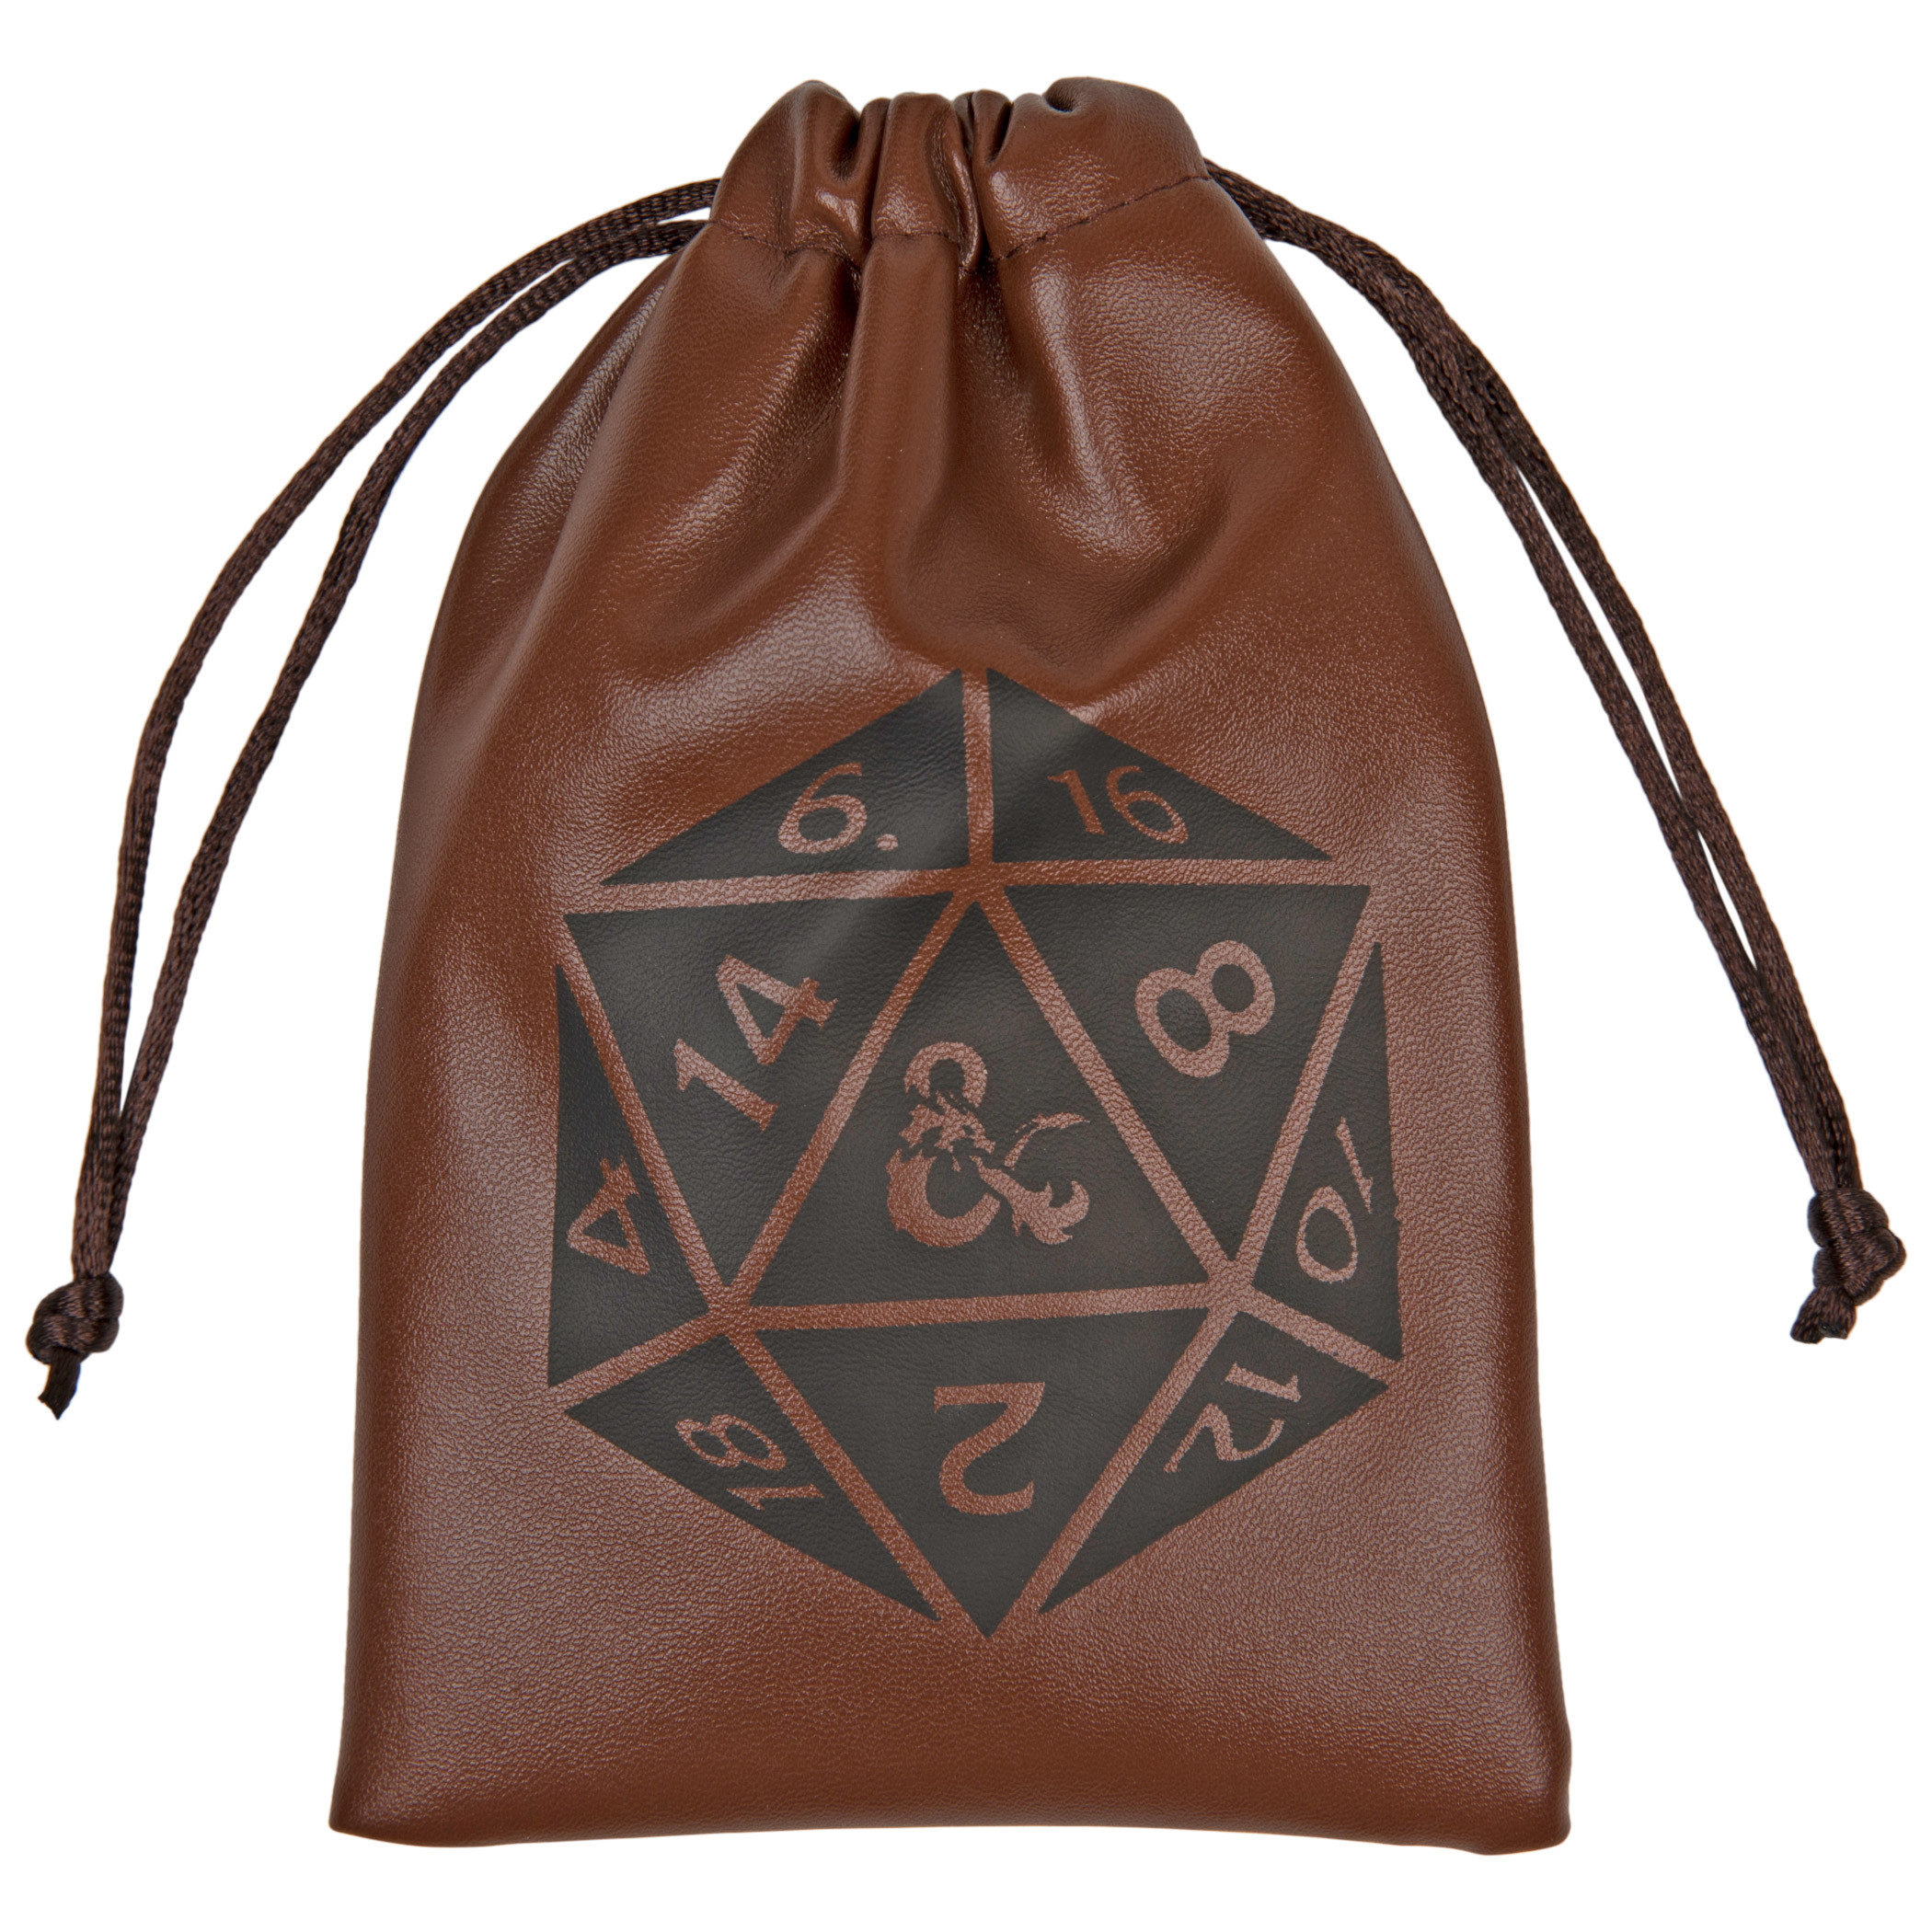 Dungeons & Dragons Dice Set and Bag